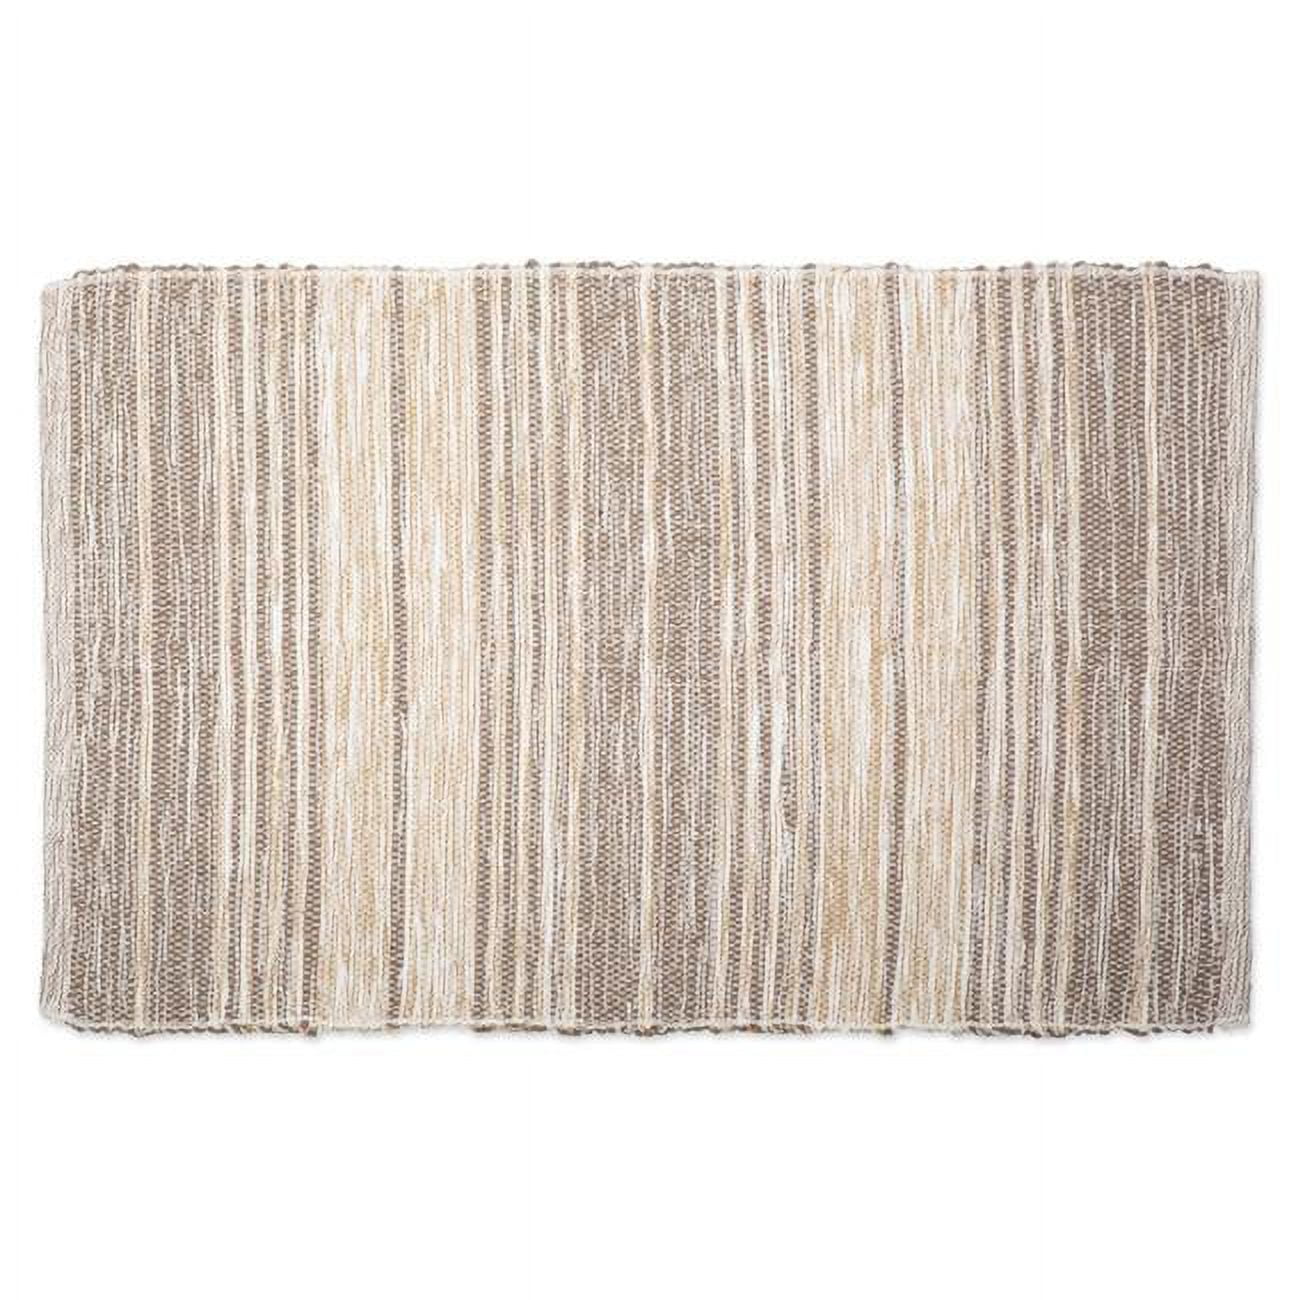 Design Imports Camz11091 Variegated Stone Recycled Yarn Rug, 2 X 3 Ft.